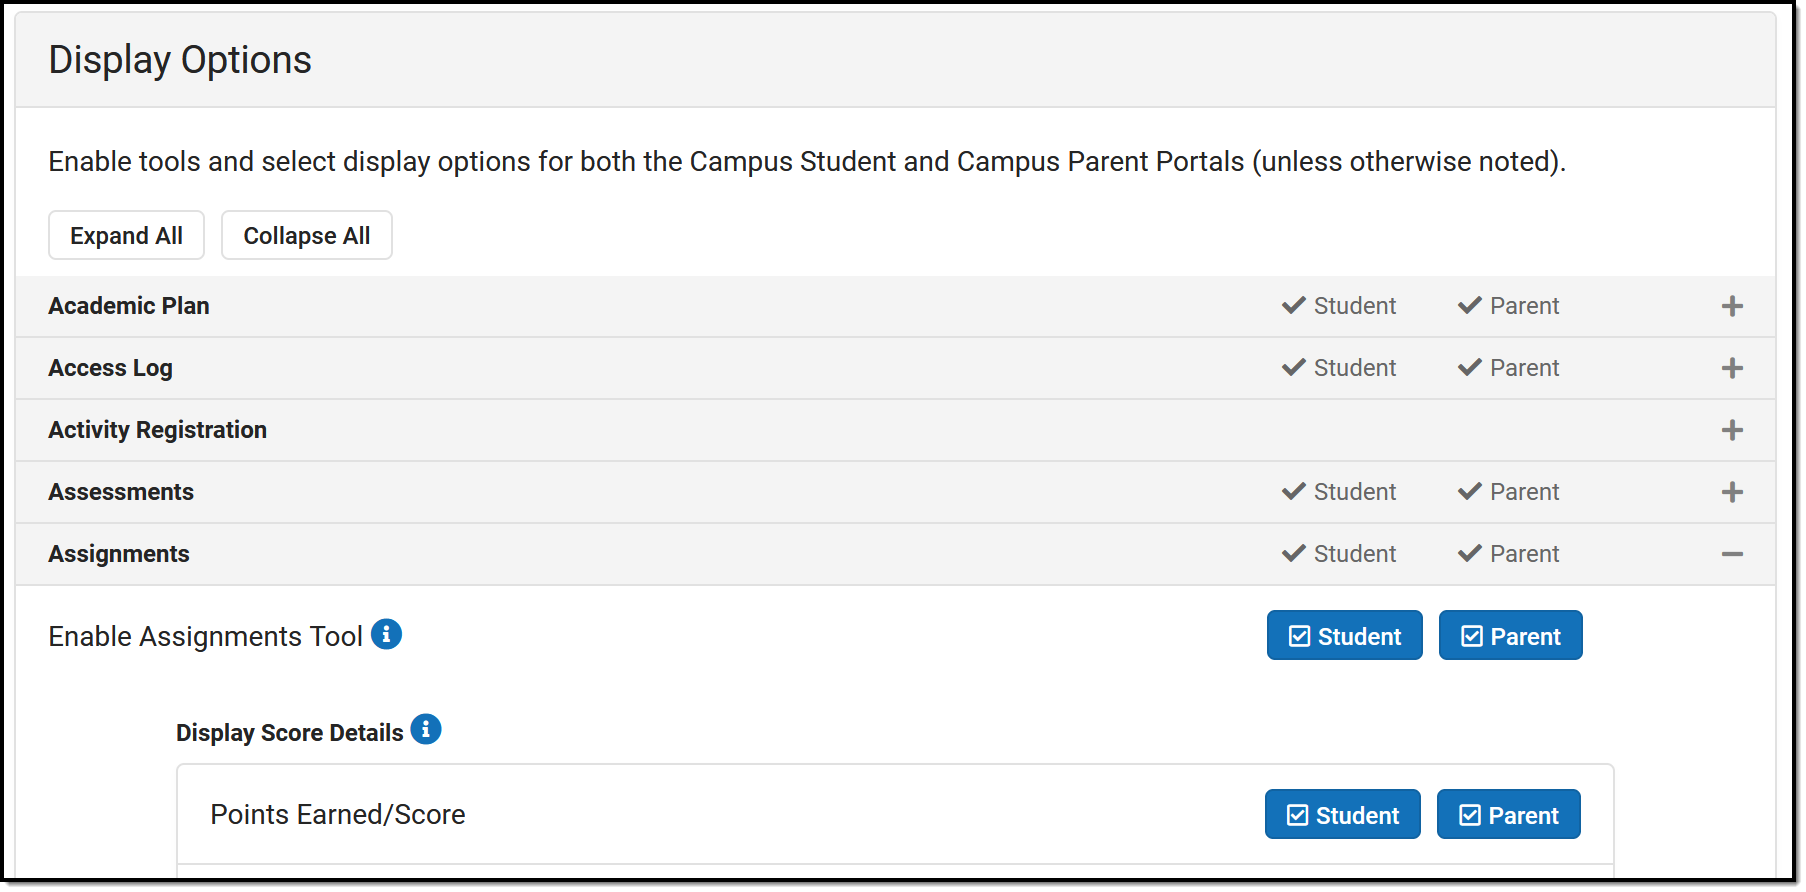 Screenshot of the portion of the display options tool, with one category of options expanded to show child options and the Student and Parent checkboxes. 